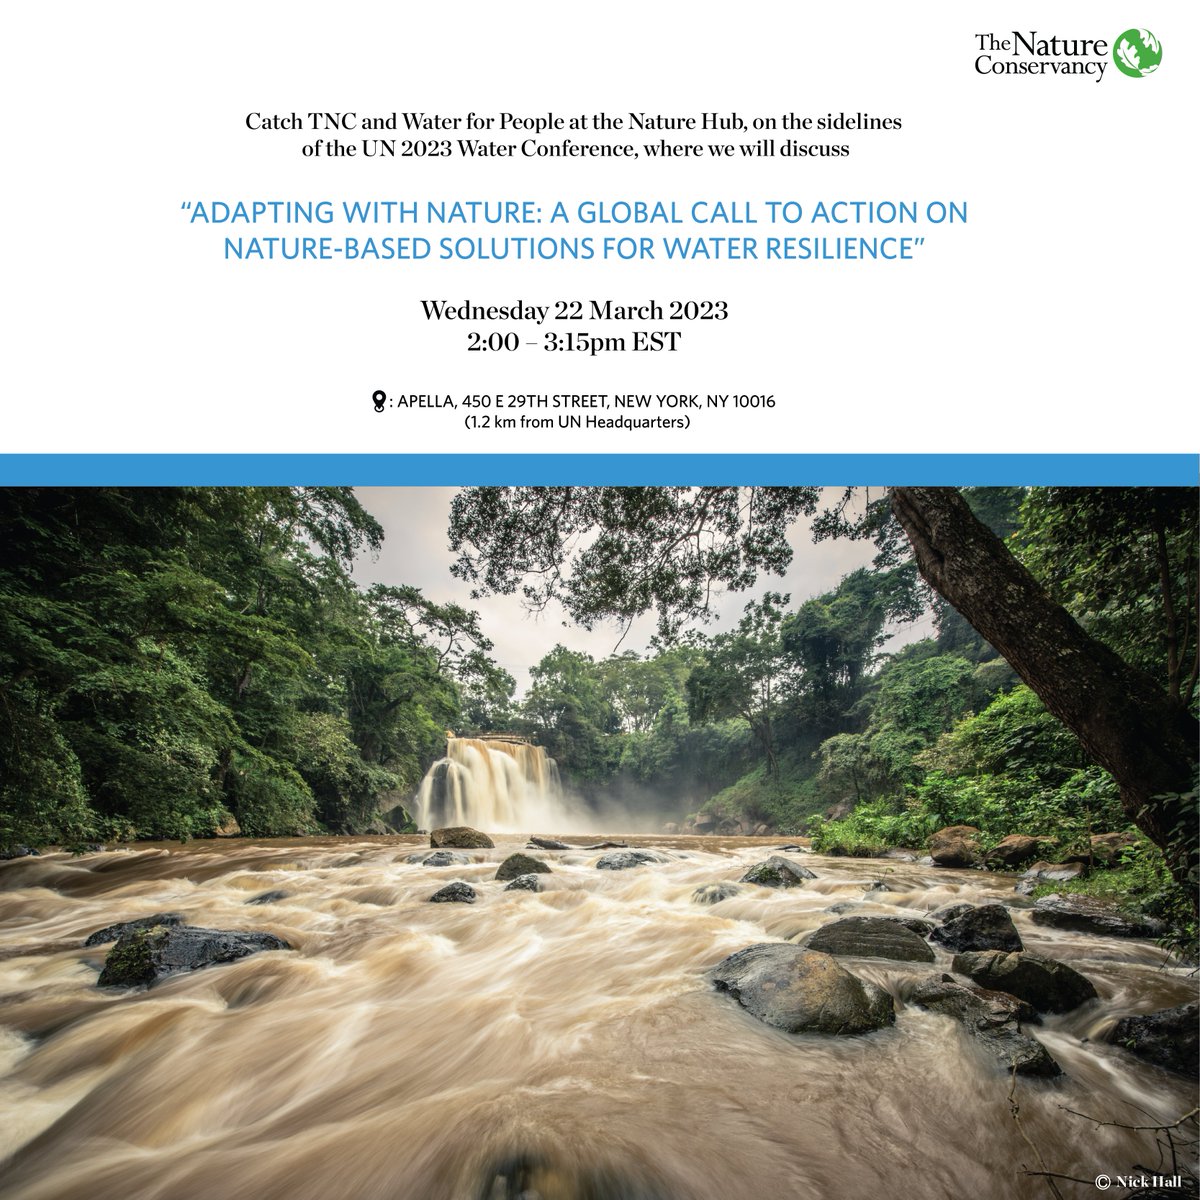 This week, representatives from around the world are in New York for the UN 2023 Water Conference. Catch TNC & @waterforpeople at the #NatureHub discussing the Blantyre Water Fund in #Malawi, just a few minutes from the UN Headquarters! #WaterAction NATURE.ORG/NATUREHUB